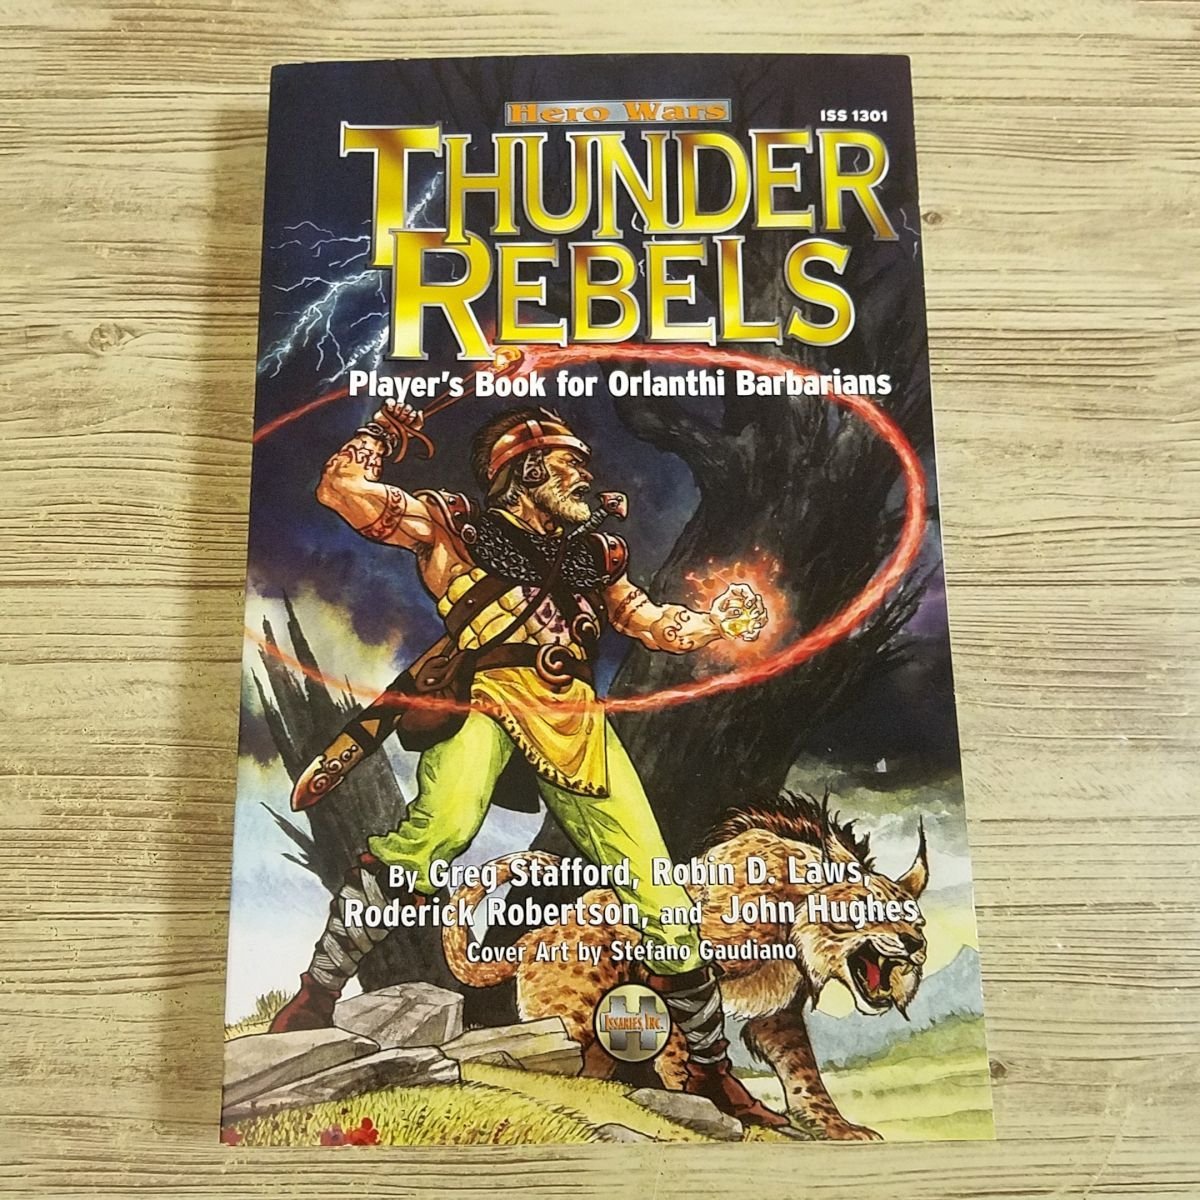 TRPG[ヒーロー・ウォーズ ISS 1301 THUNDER REBELS : Player’s Book for Orlanthi Barbarians] 洋書【送料180円】_画像1